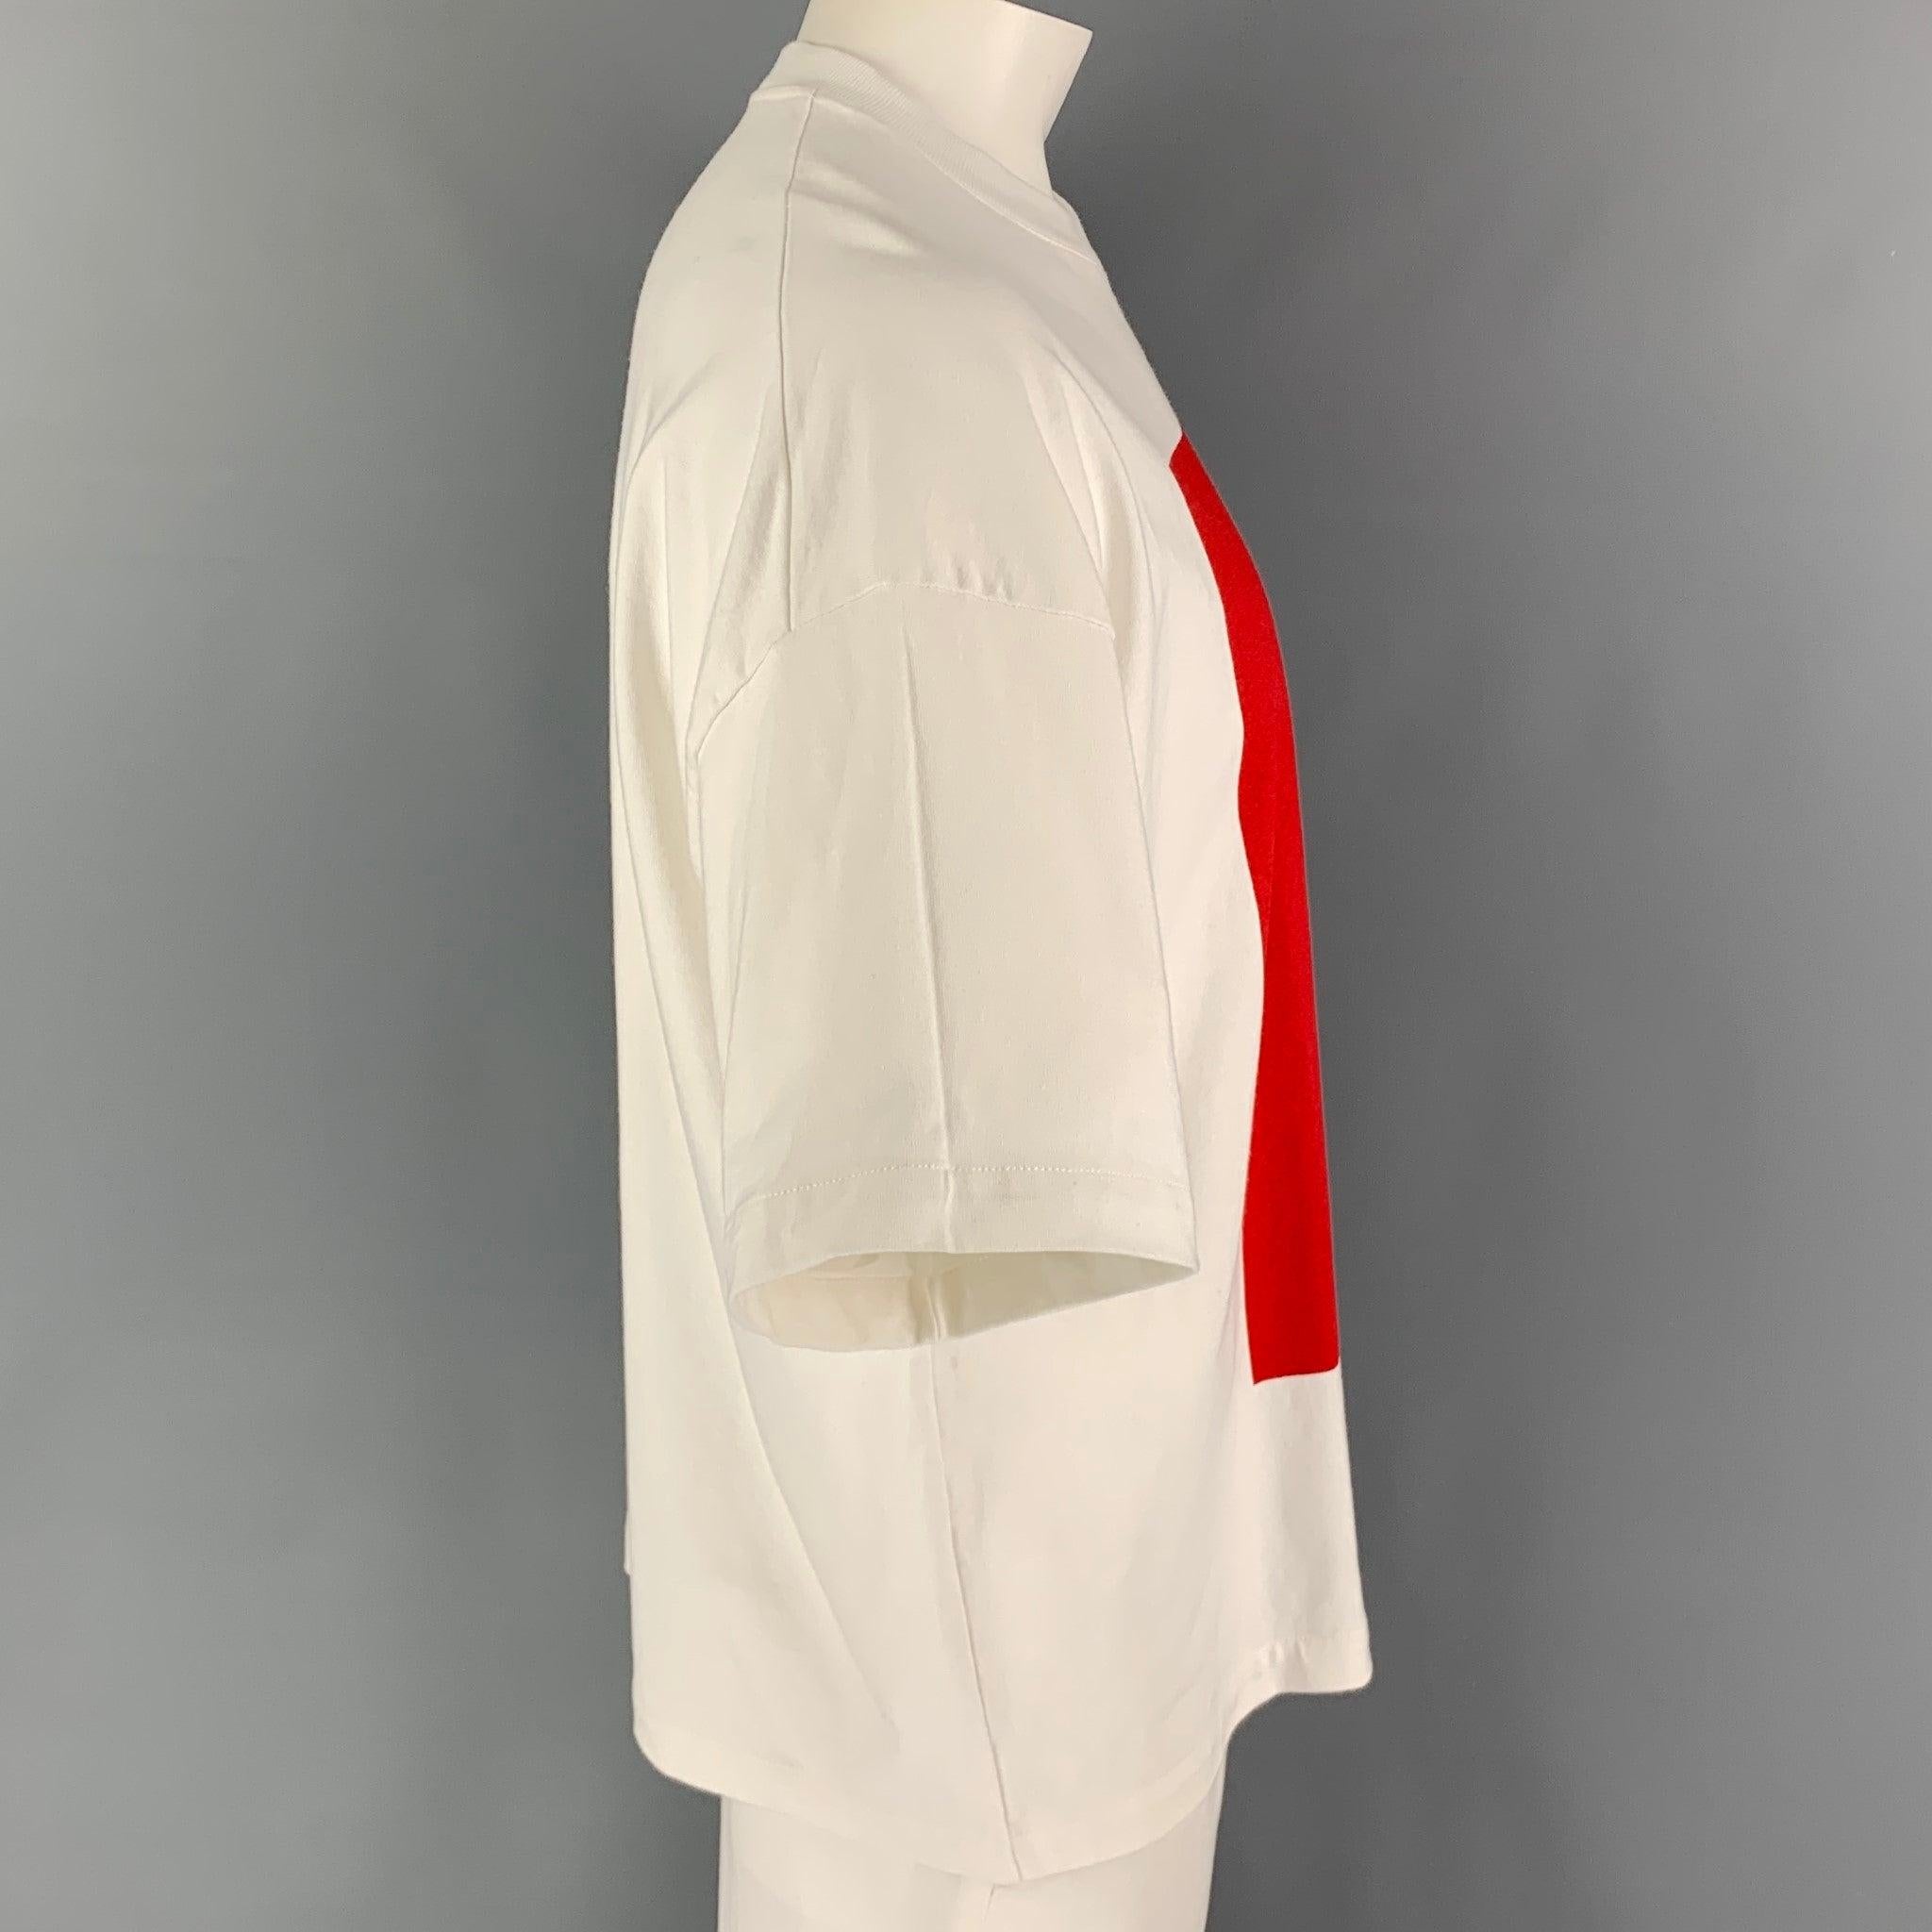 JIL SANDER t-shirt comes in a white & red color block cotton featuring a 